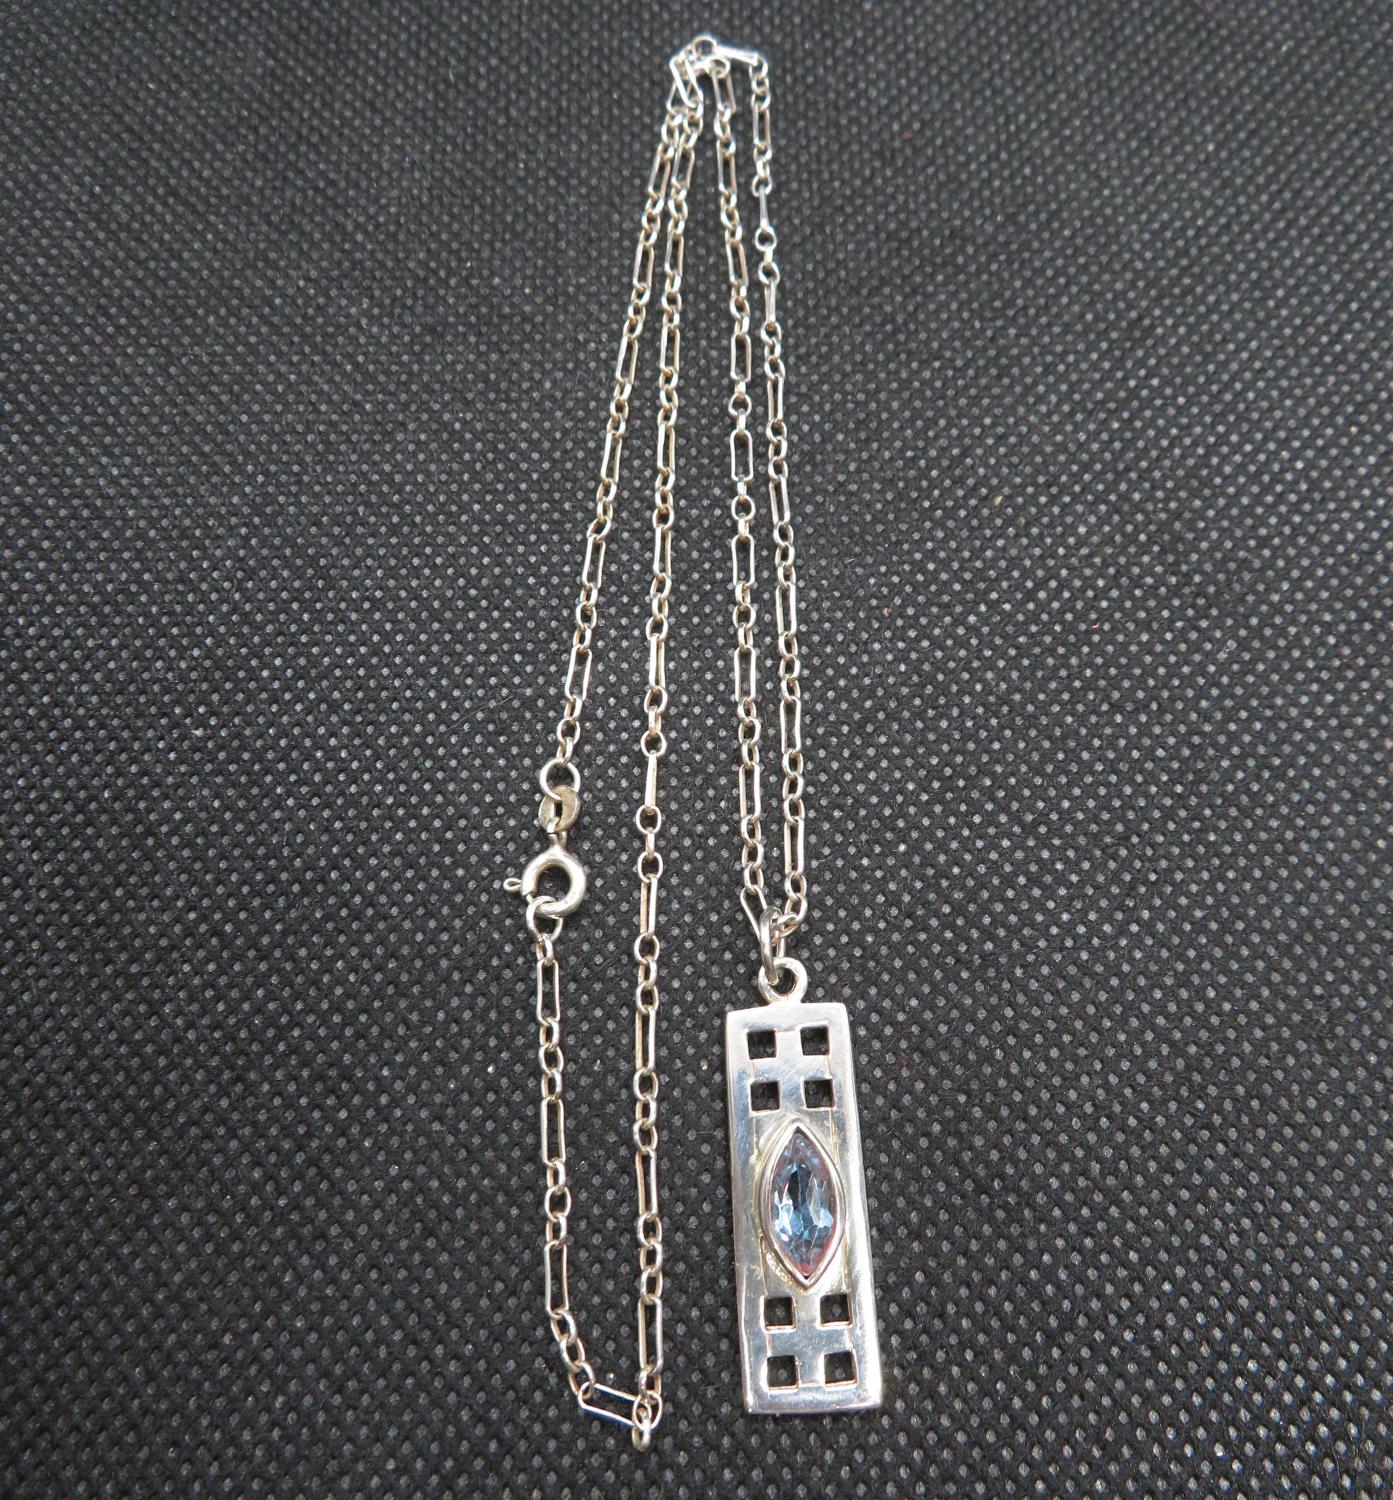 Charles Rennie style pendant set with Marquis cut blue topaz on 18" chain in box 6.5g - Image 2 of 3